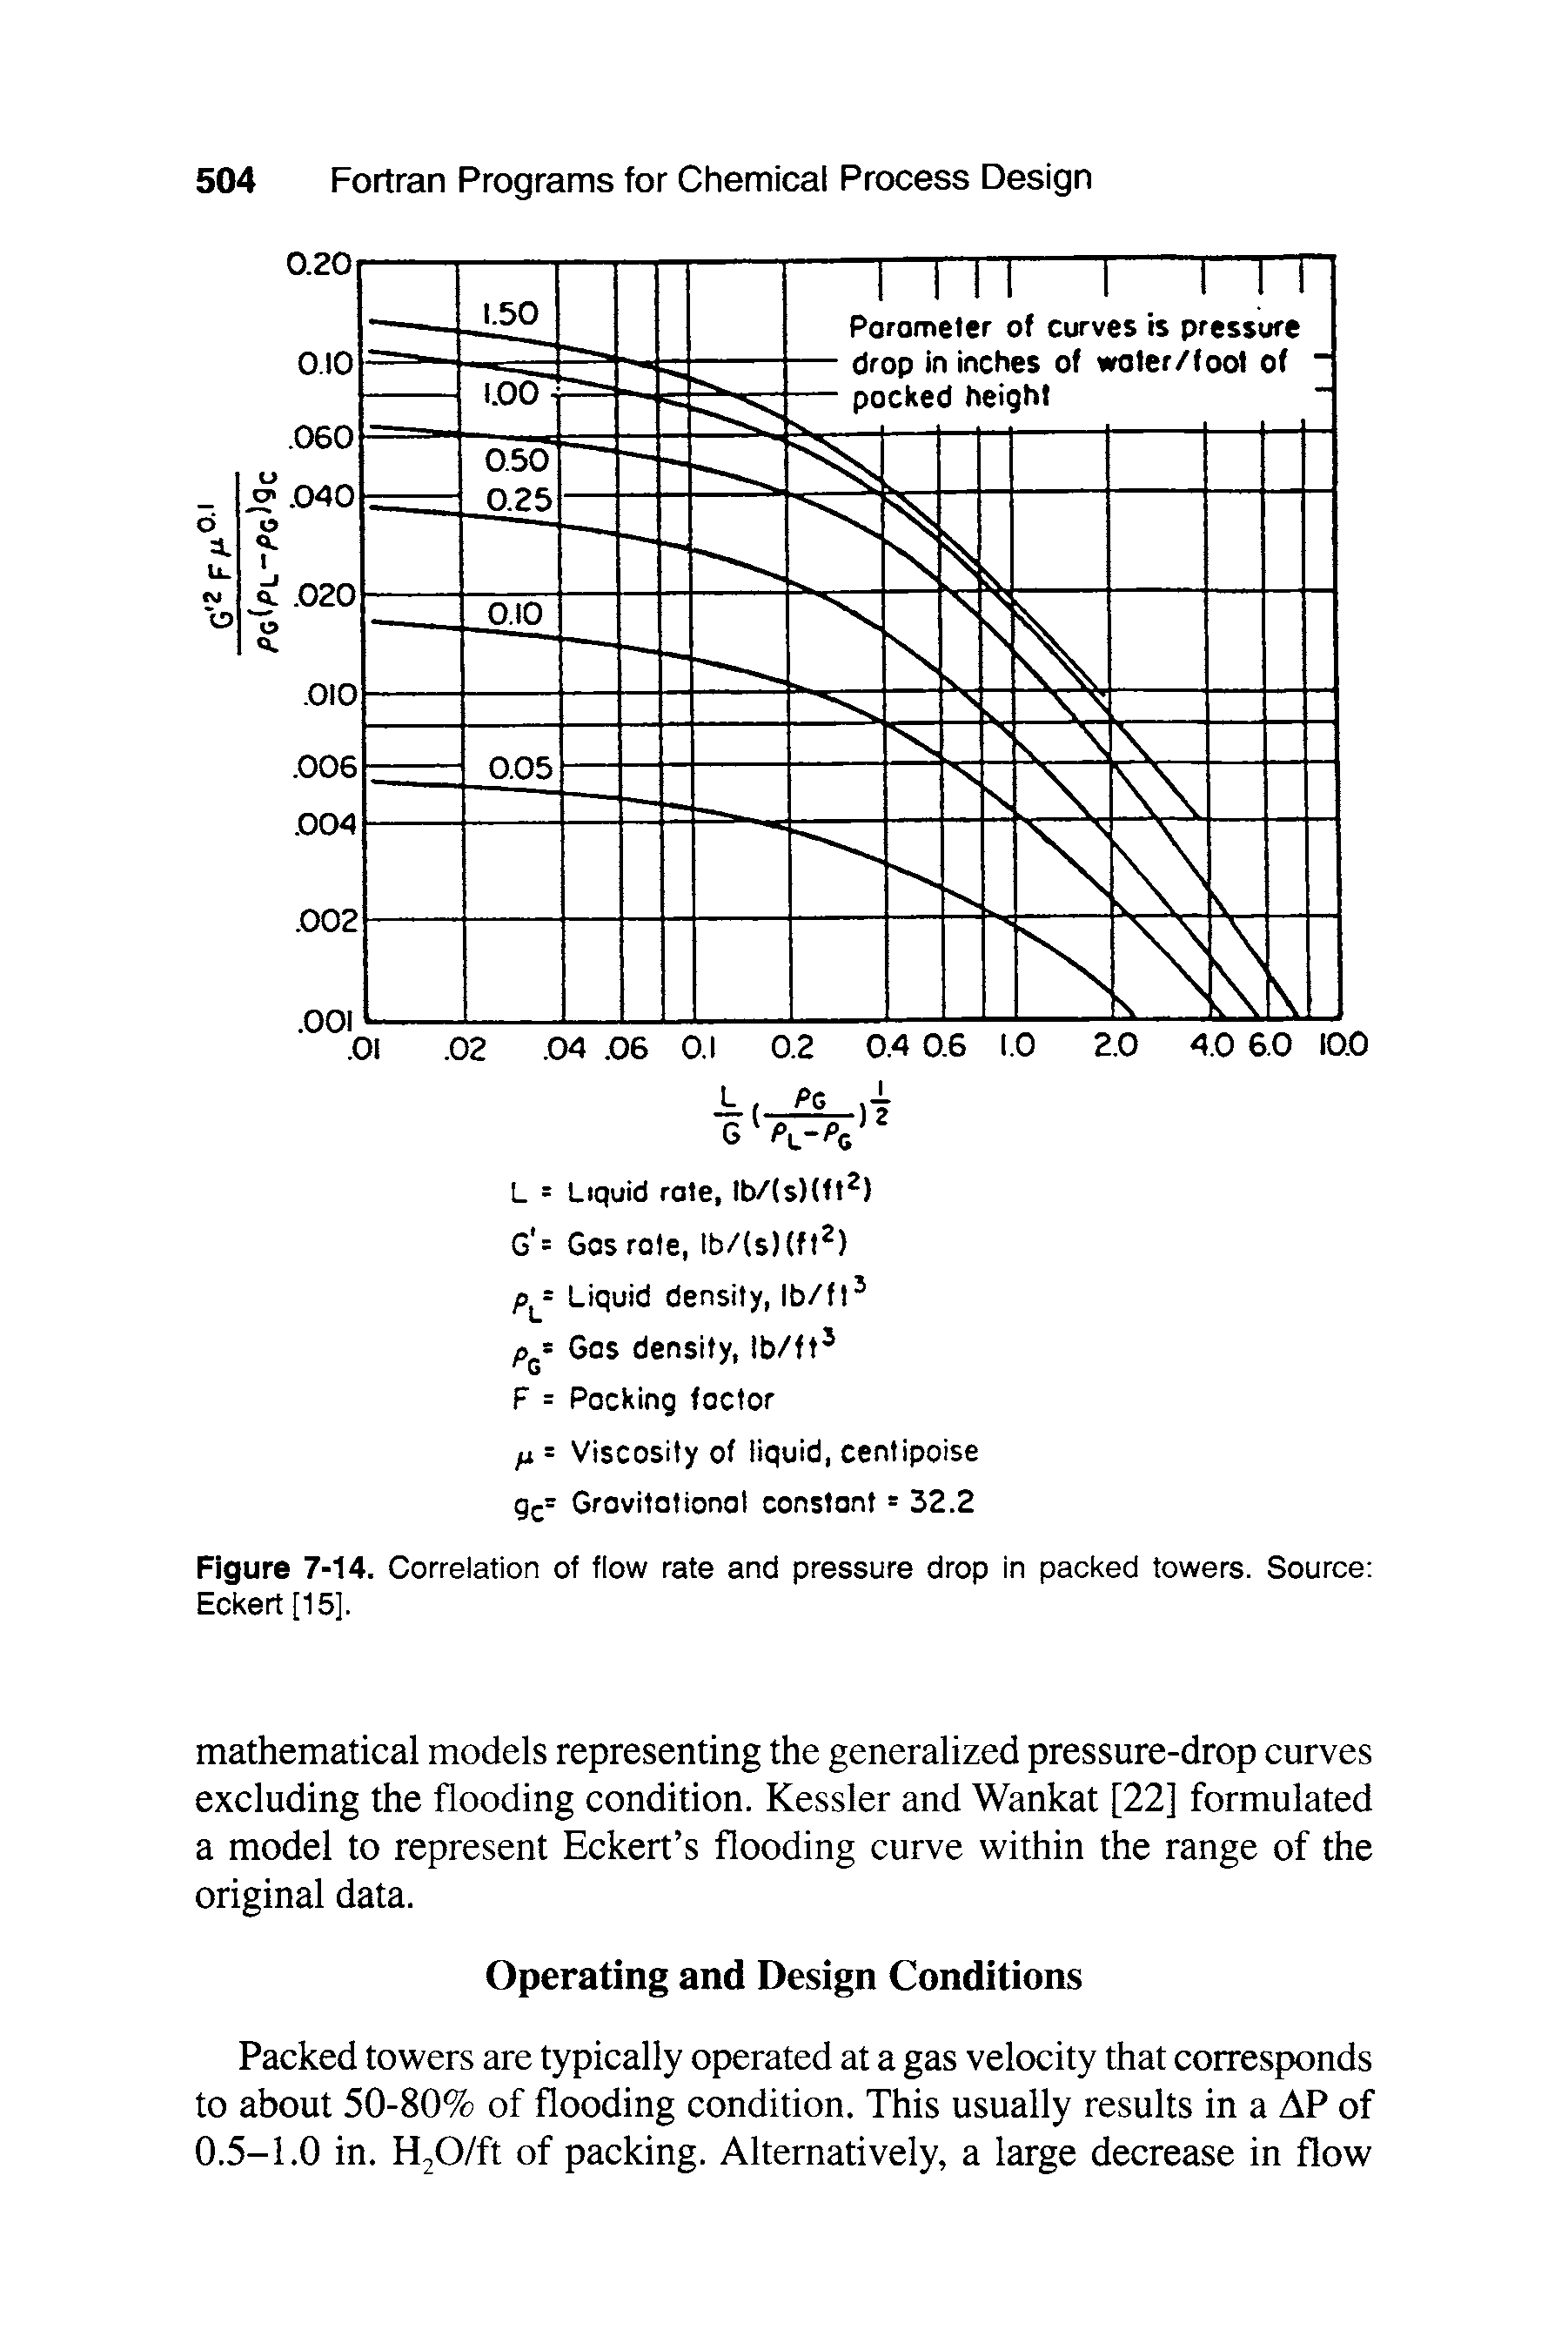 Figure 7-14. Correlation of flow rate and pressure drop in packed towers. Source Eckert [15].